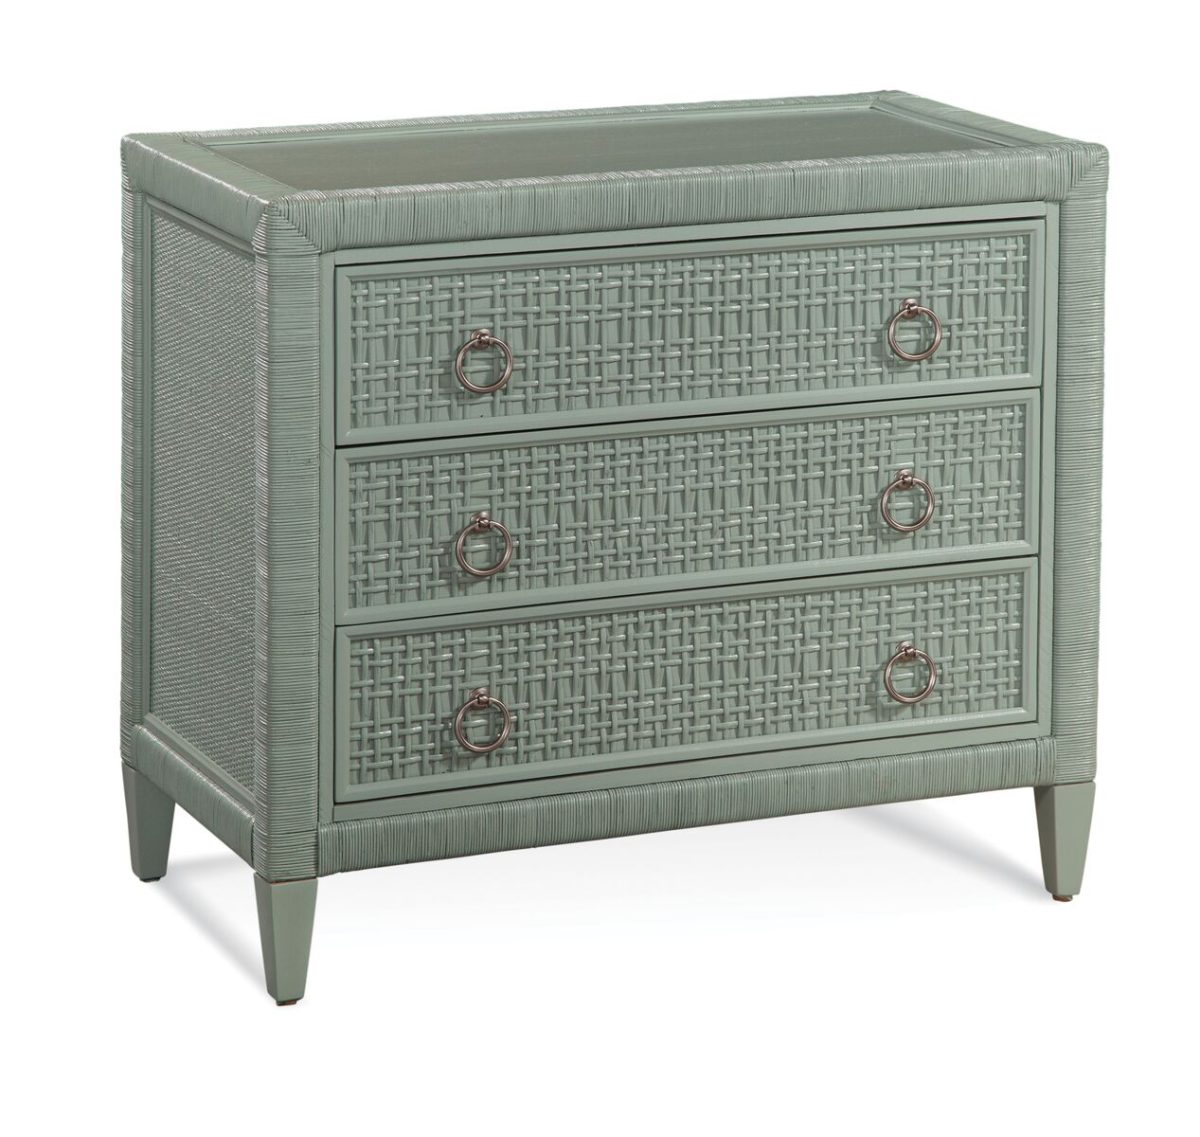 Naples Wicker and Rattan 3-Drawer Chest Model 807-042 by Braxton Culler